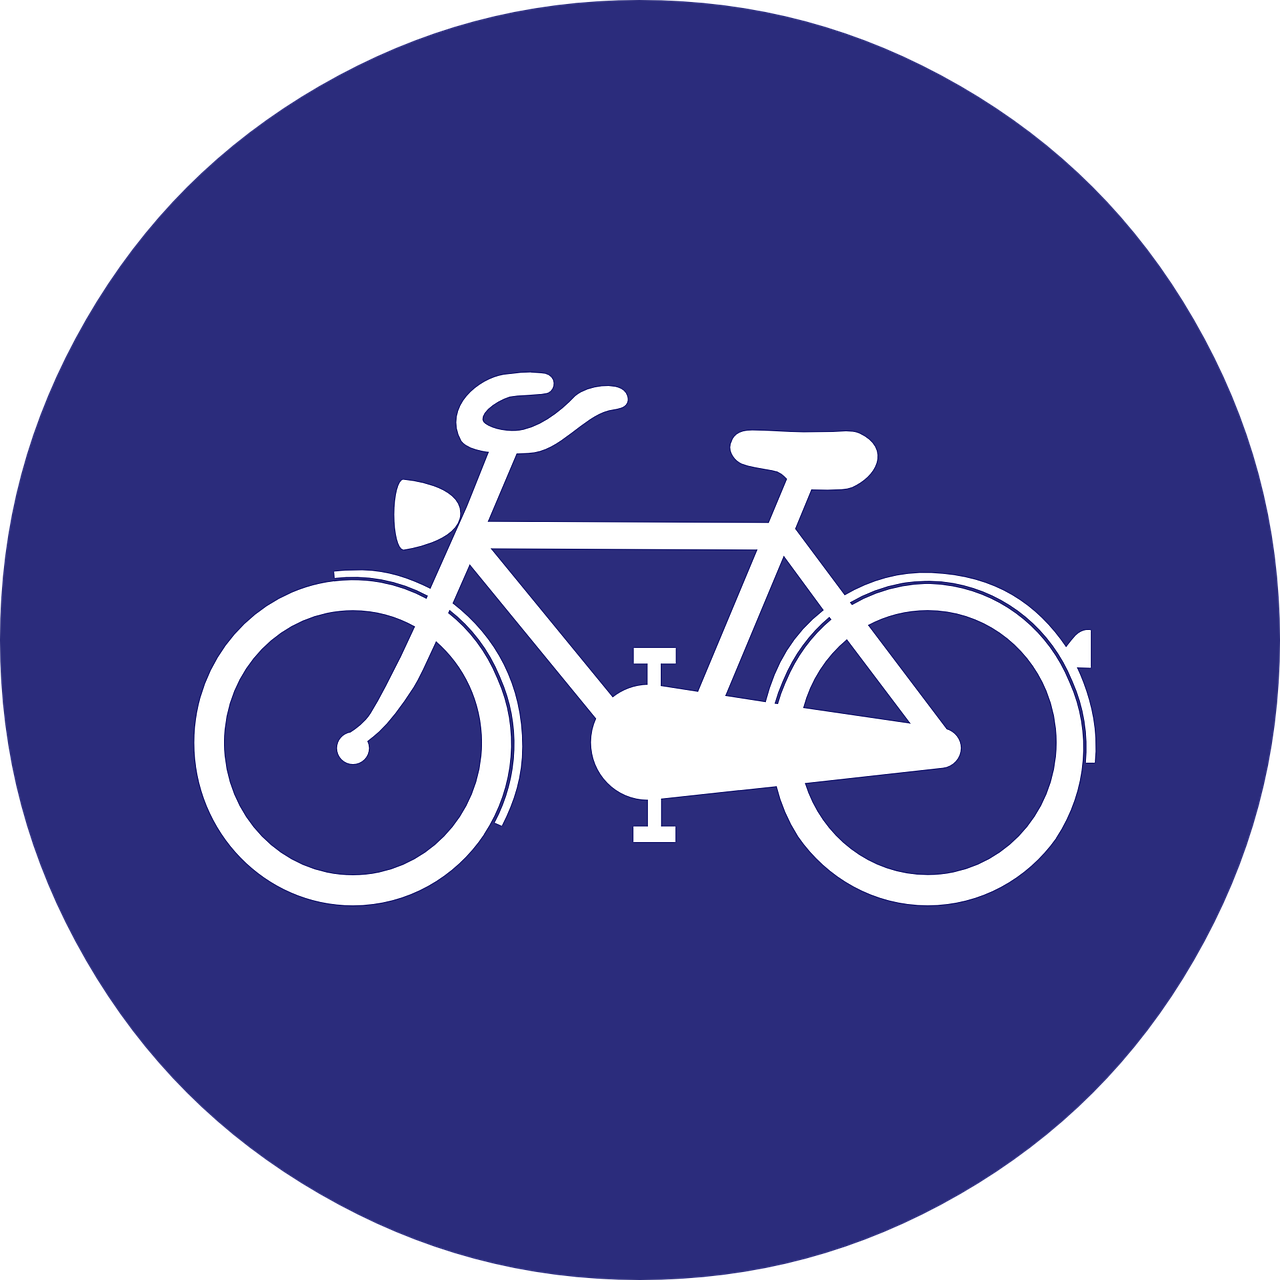 cycle path, bicycle lane, road sign